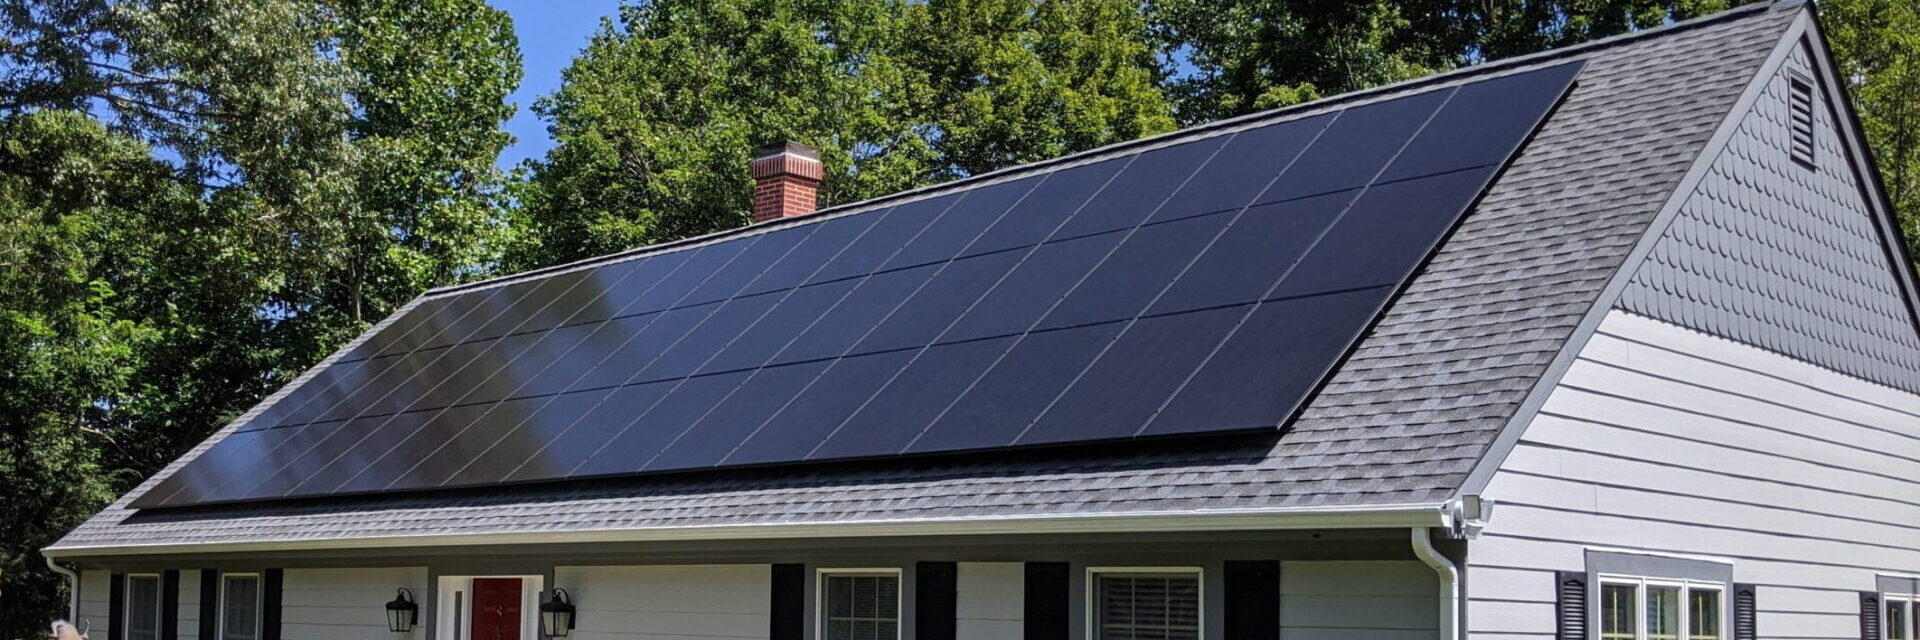 A residential home in Harrisonburg Virginia with rooftop solar panels